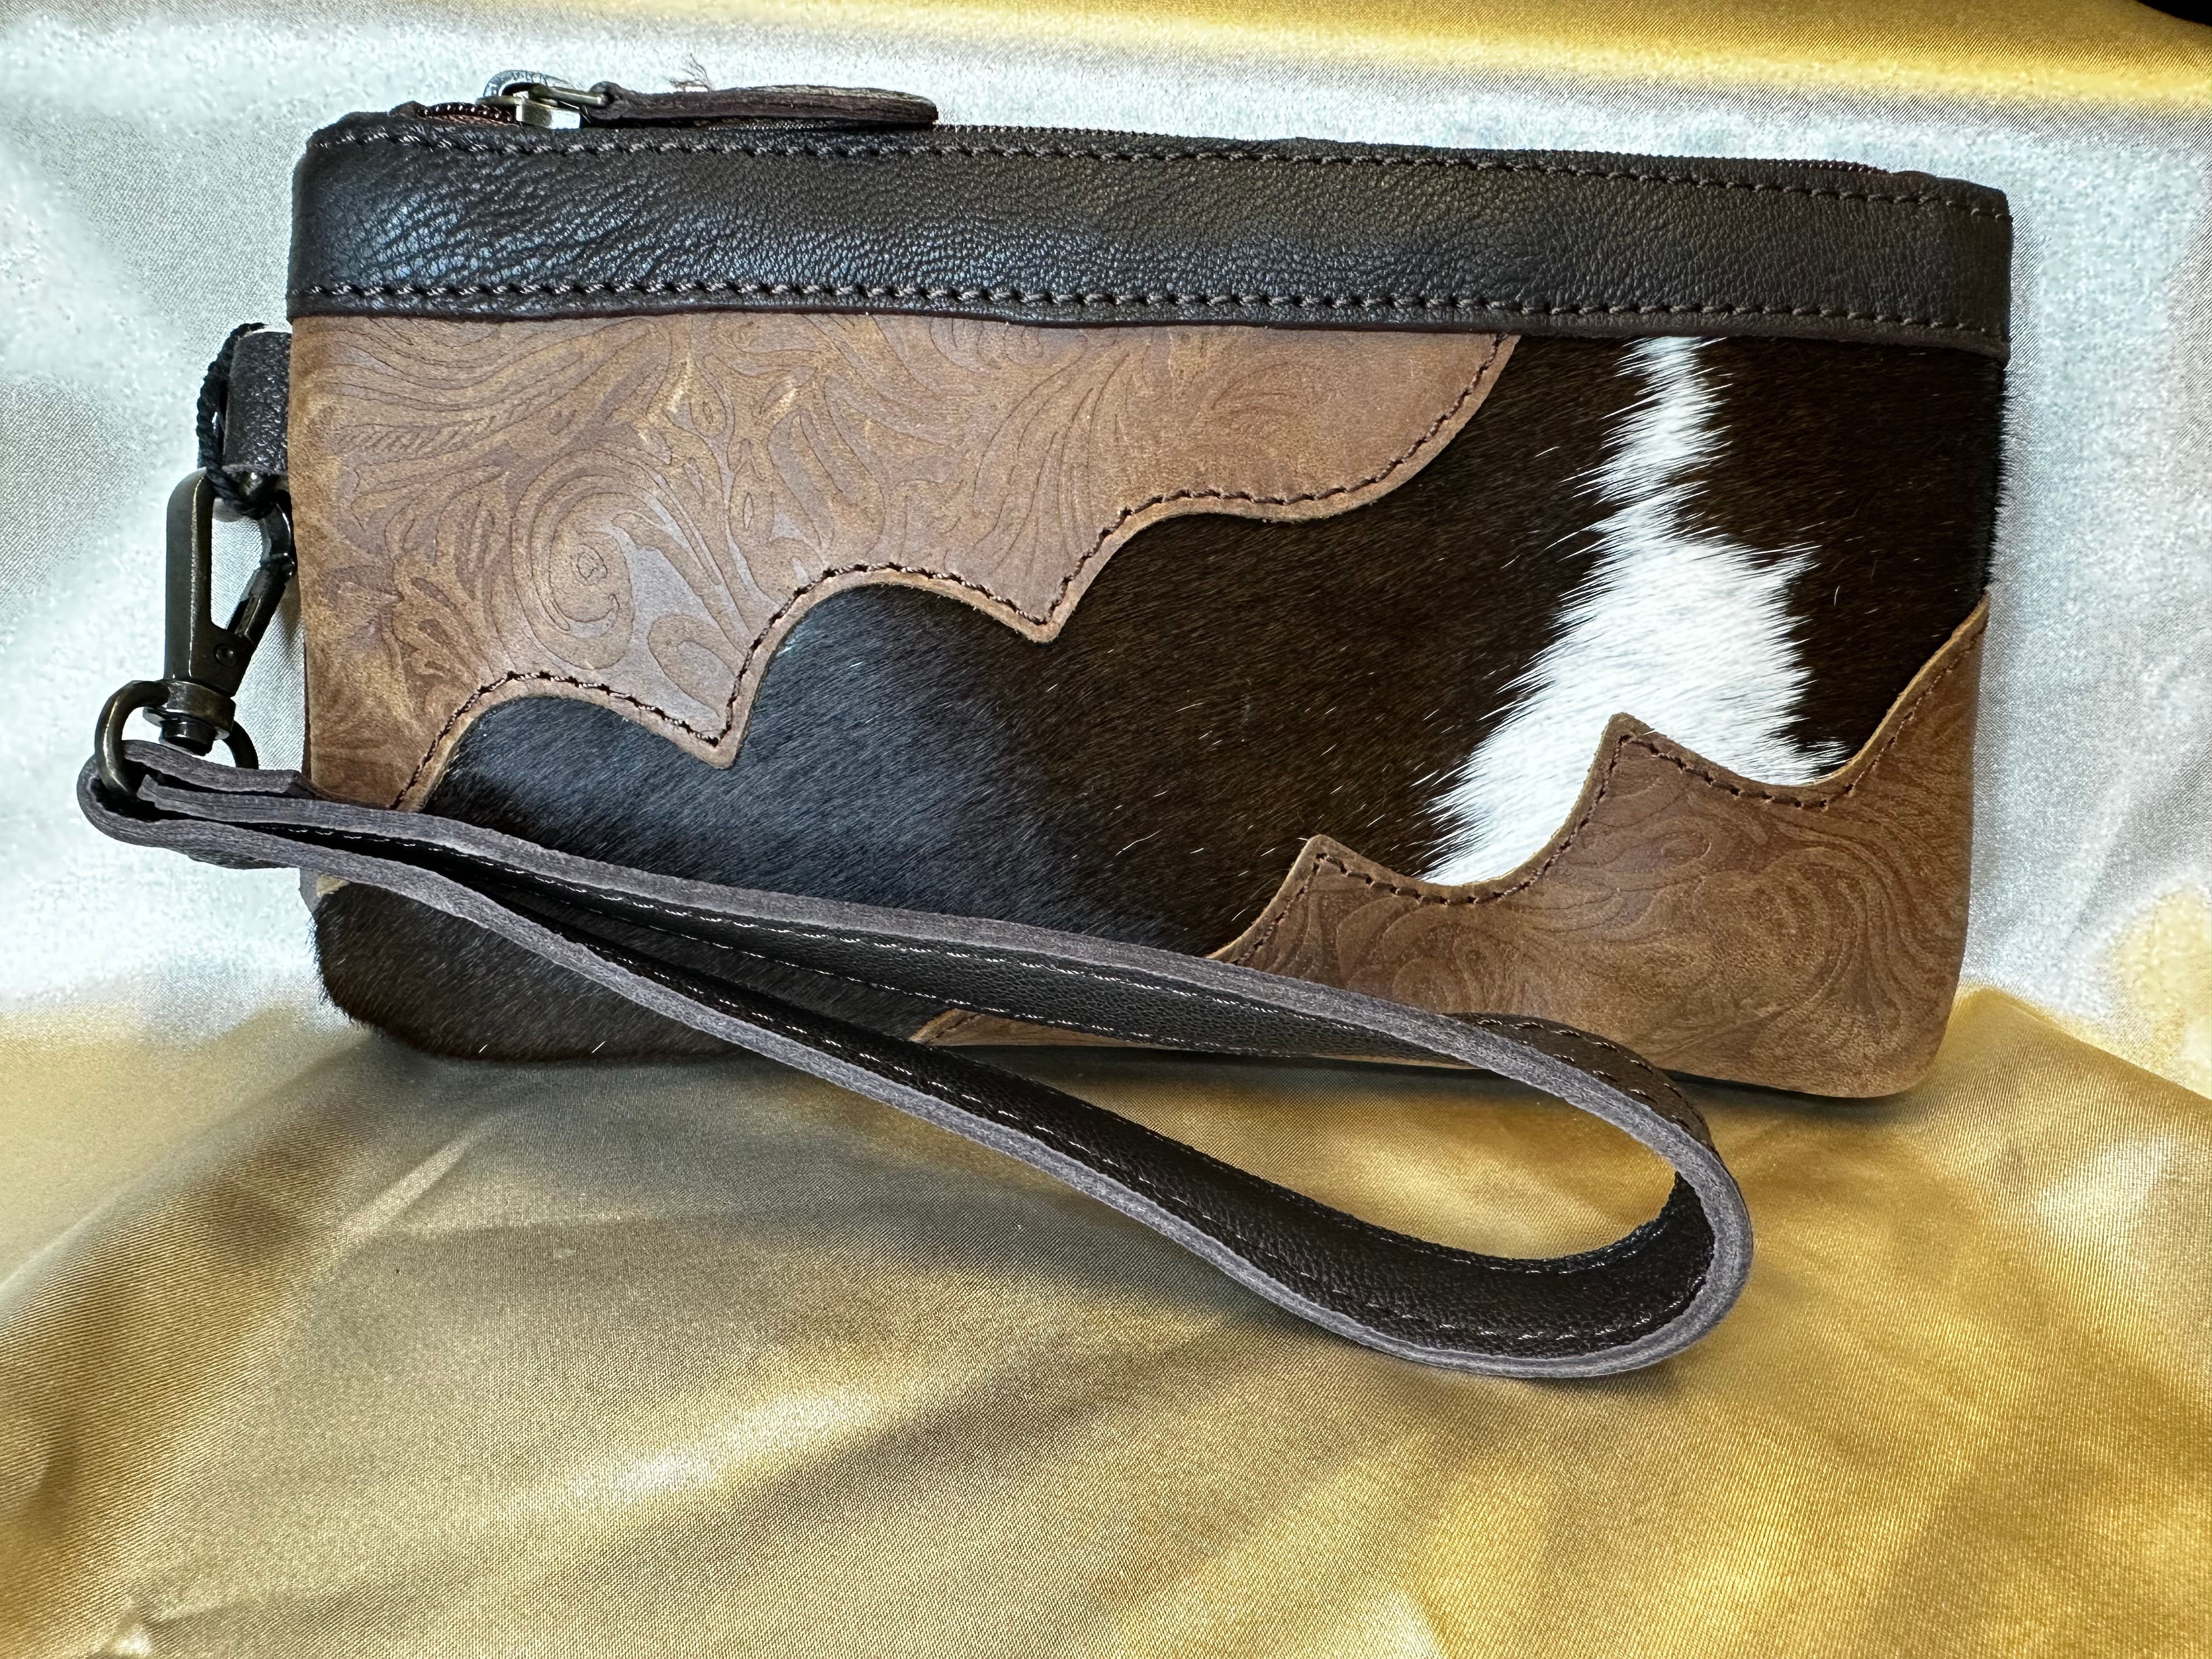 Hot Selling Tooled Leather Clutch Wallet Purse Hair On Leather Clutch Stylish Leather Wallets